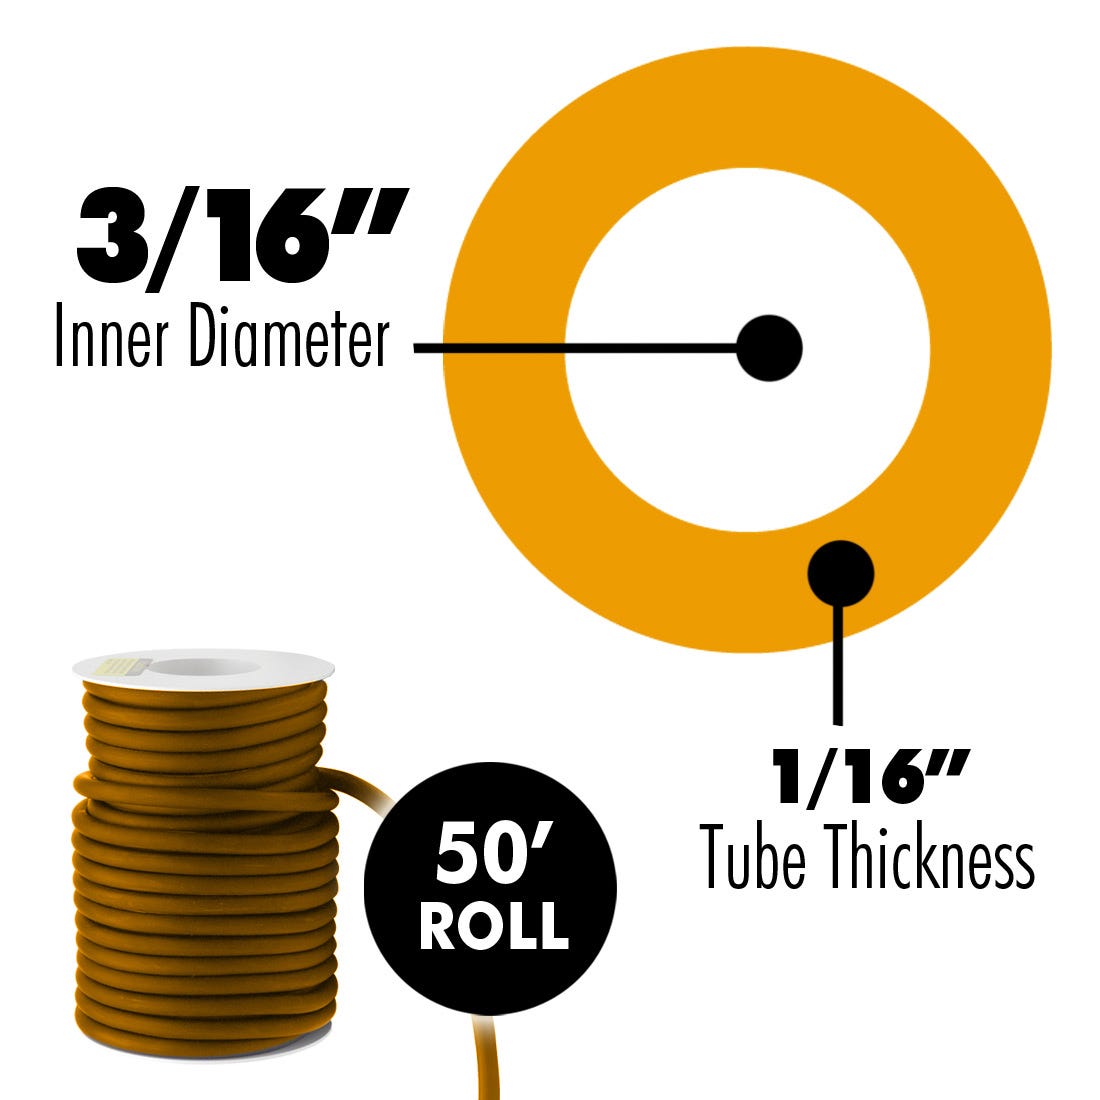 ACE Latex Rubber Tubing Amber, 3/16" x 1/16"- 50' Roll